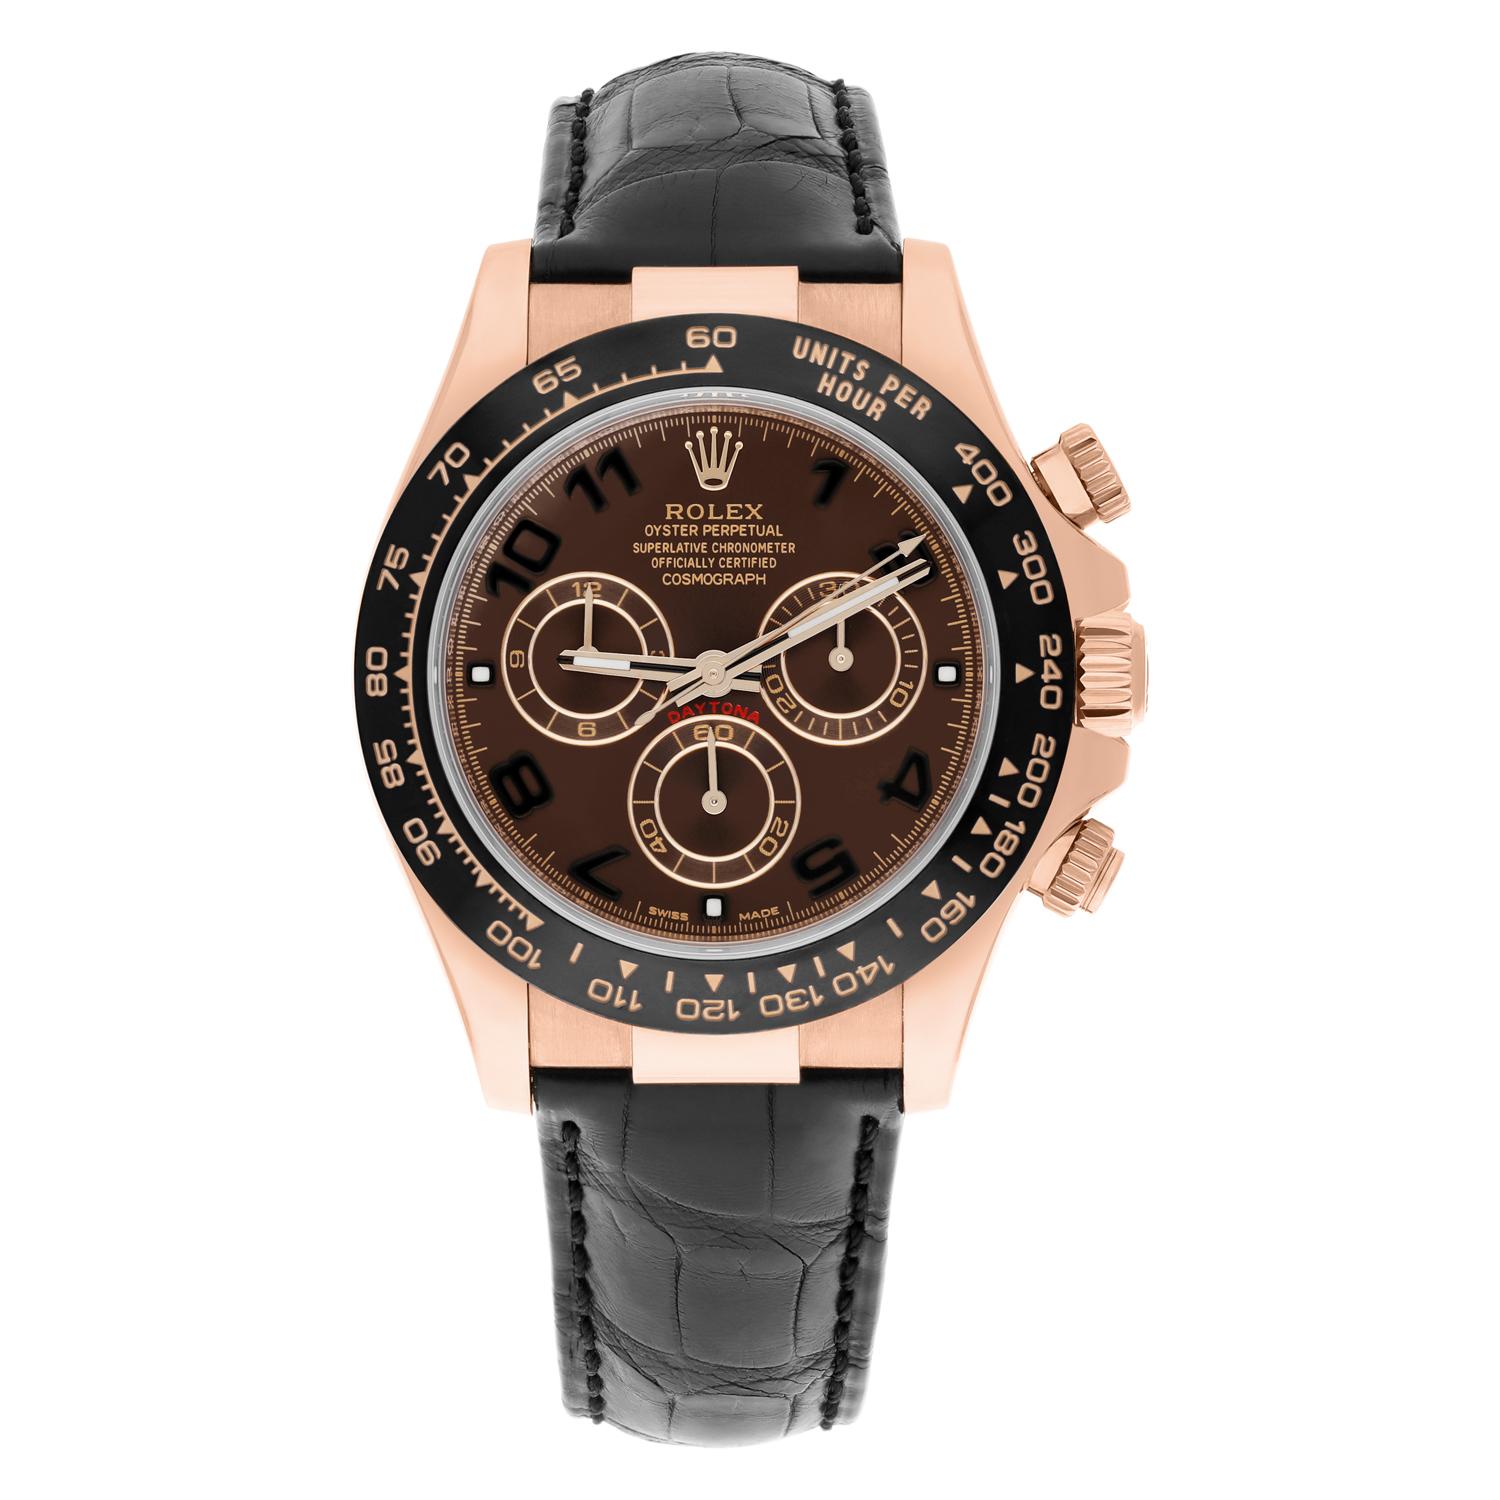 In superb condition, this 18ct Everose gold 116515LN Daytona comes complete with its original box and papers. With its chocolate brown dial and scratch-resistant black Cerachrom bezel this current model Cosmograph is waterproof to 100m and comes